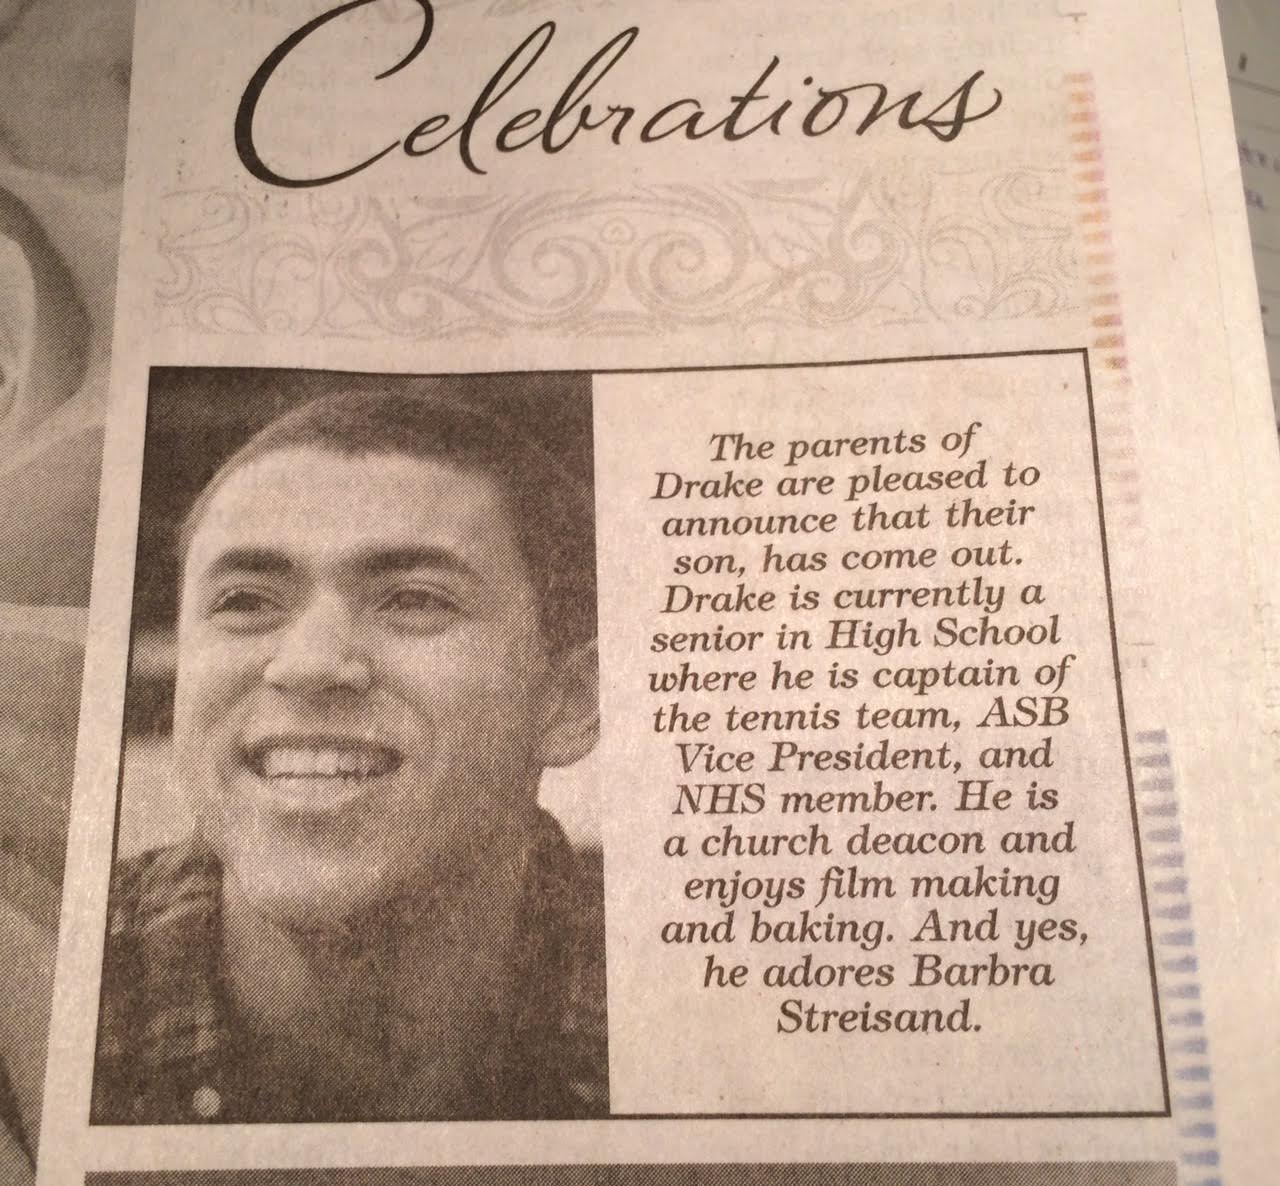 Washington state high schooler Drake Wilson's mom placed this ad celebrating his coming out in the Houston Chronicle, hoping to inspire Texans to be more accepting of LGBTQ folks after the city's equal rights ordinance defeat.